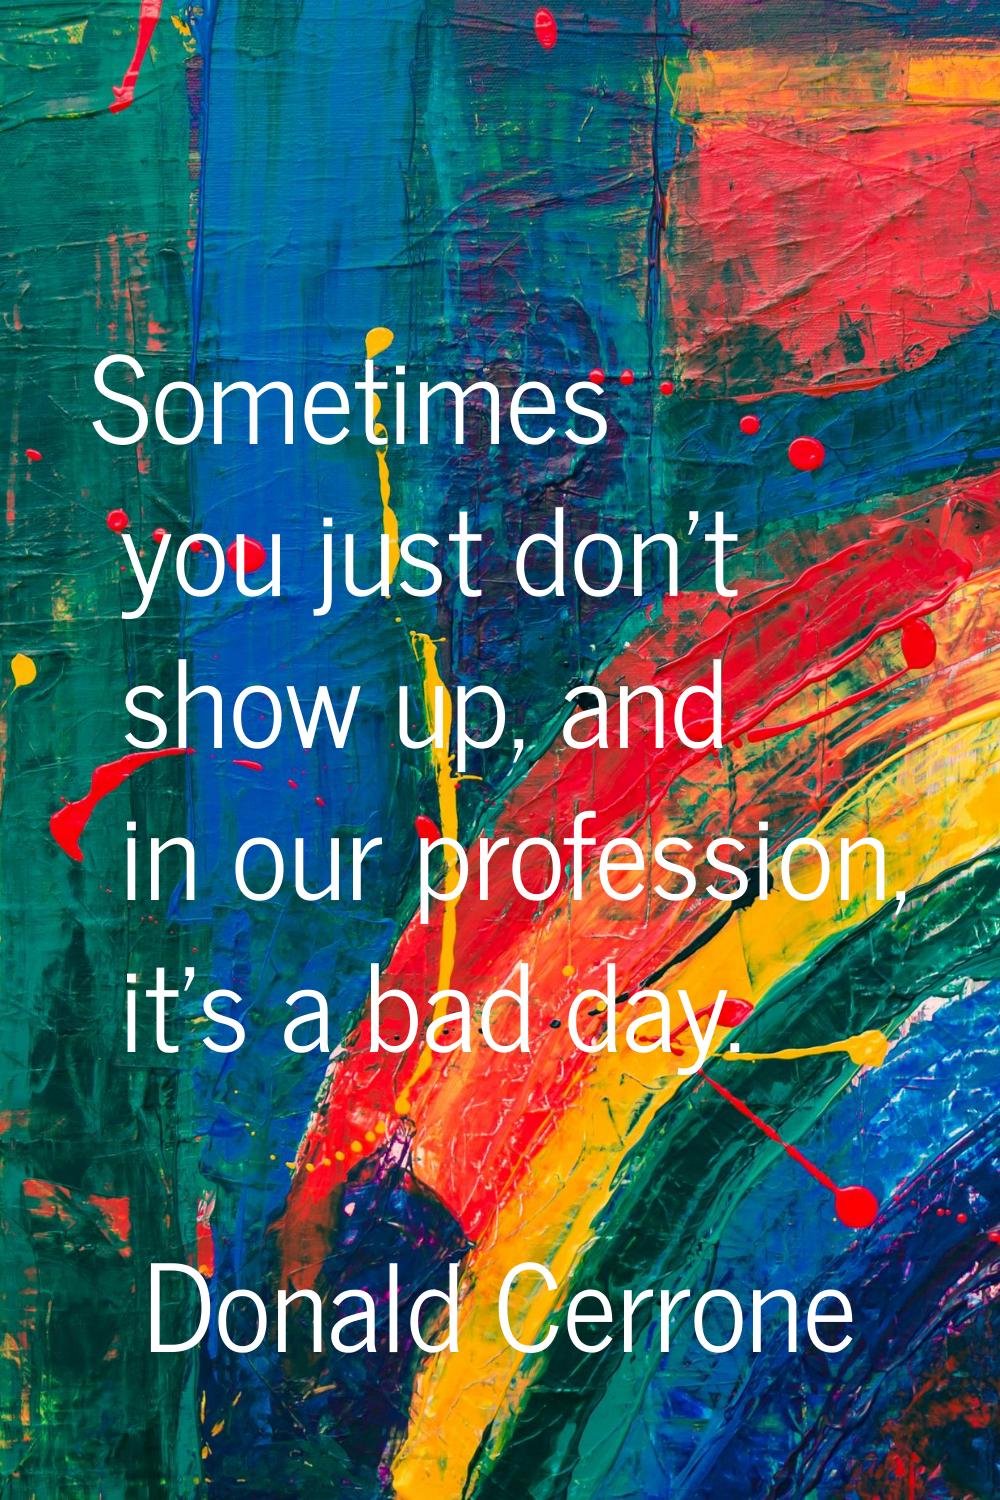 Sometimes you just don't show up, and in our profession, it's a bad day.